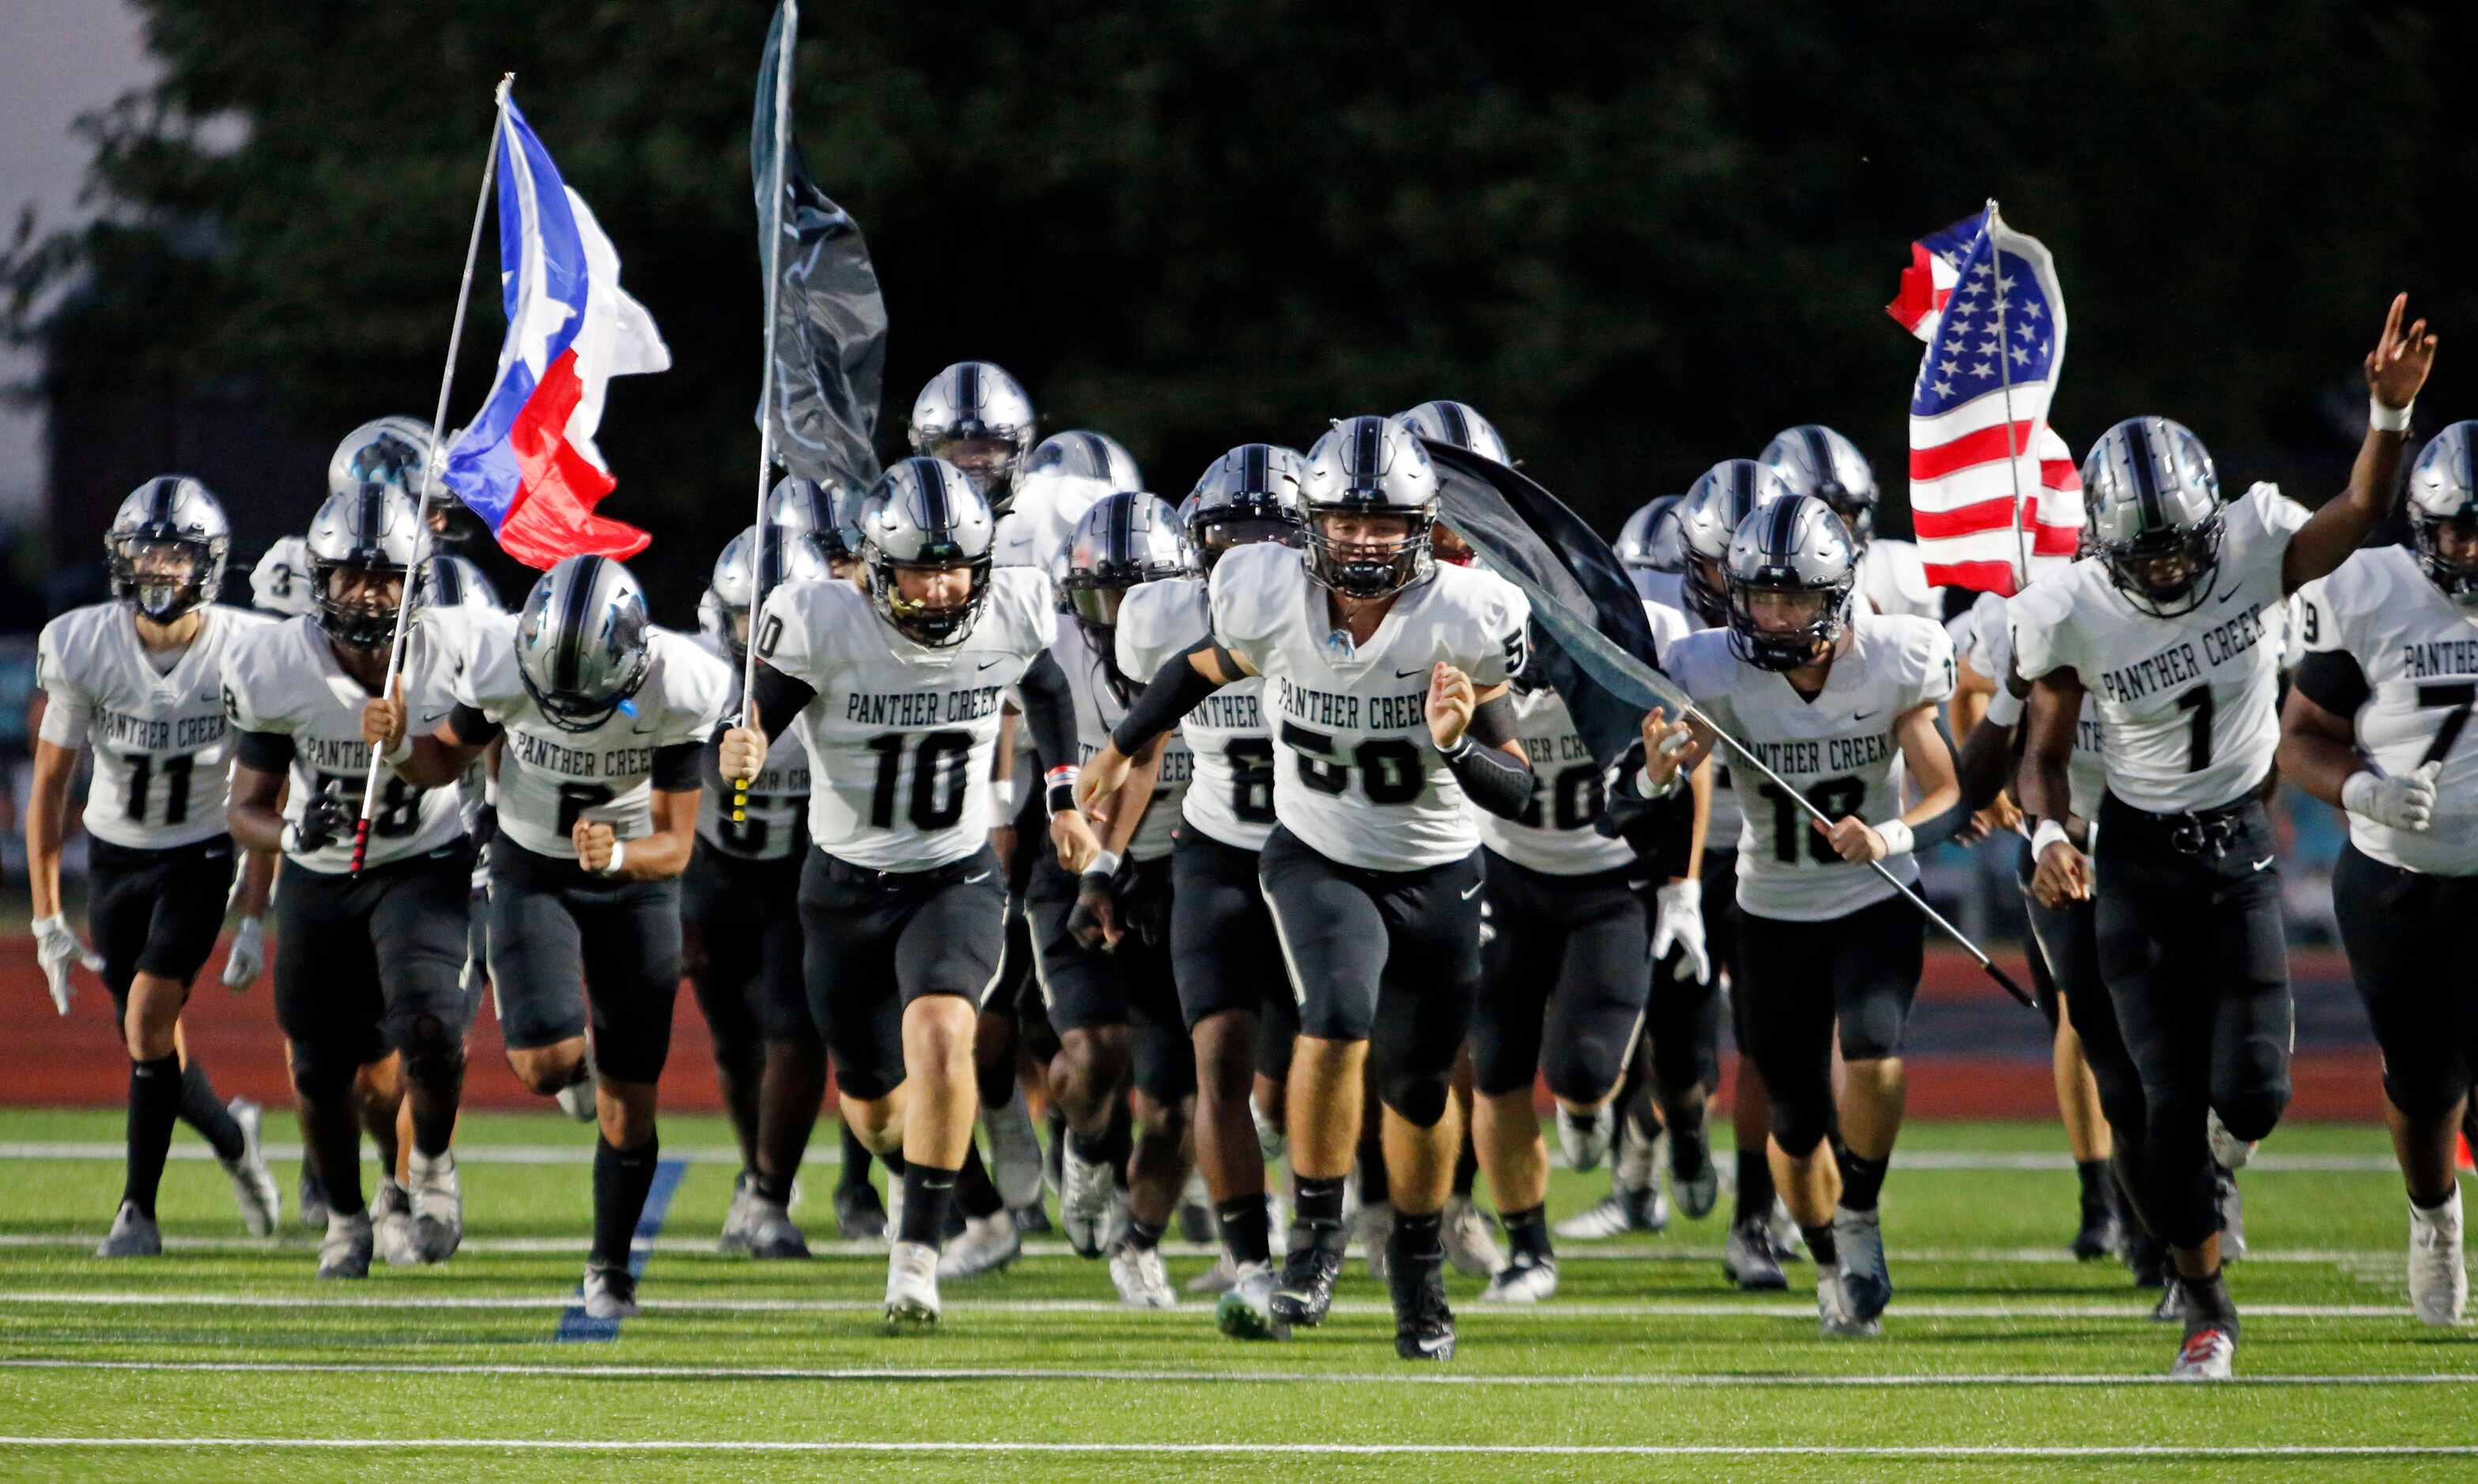 Frisco Panther Creek high takes the field before the start of the first half of a high...